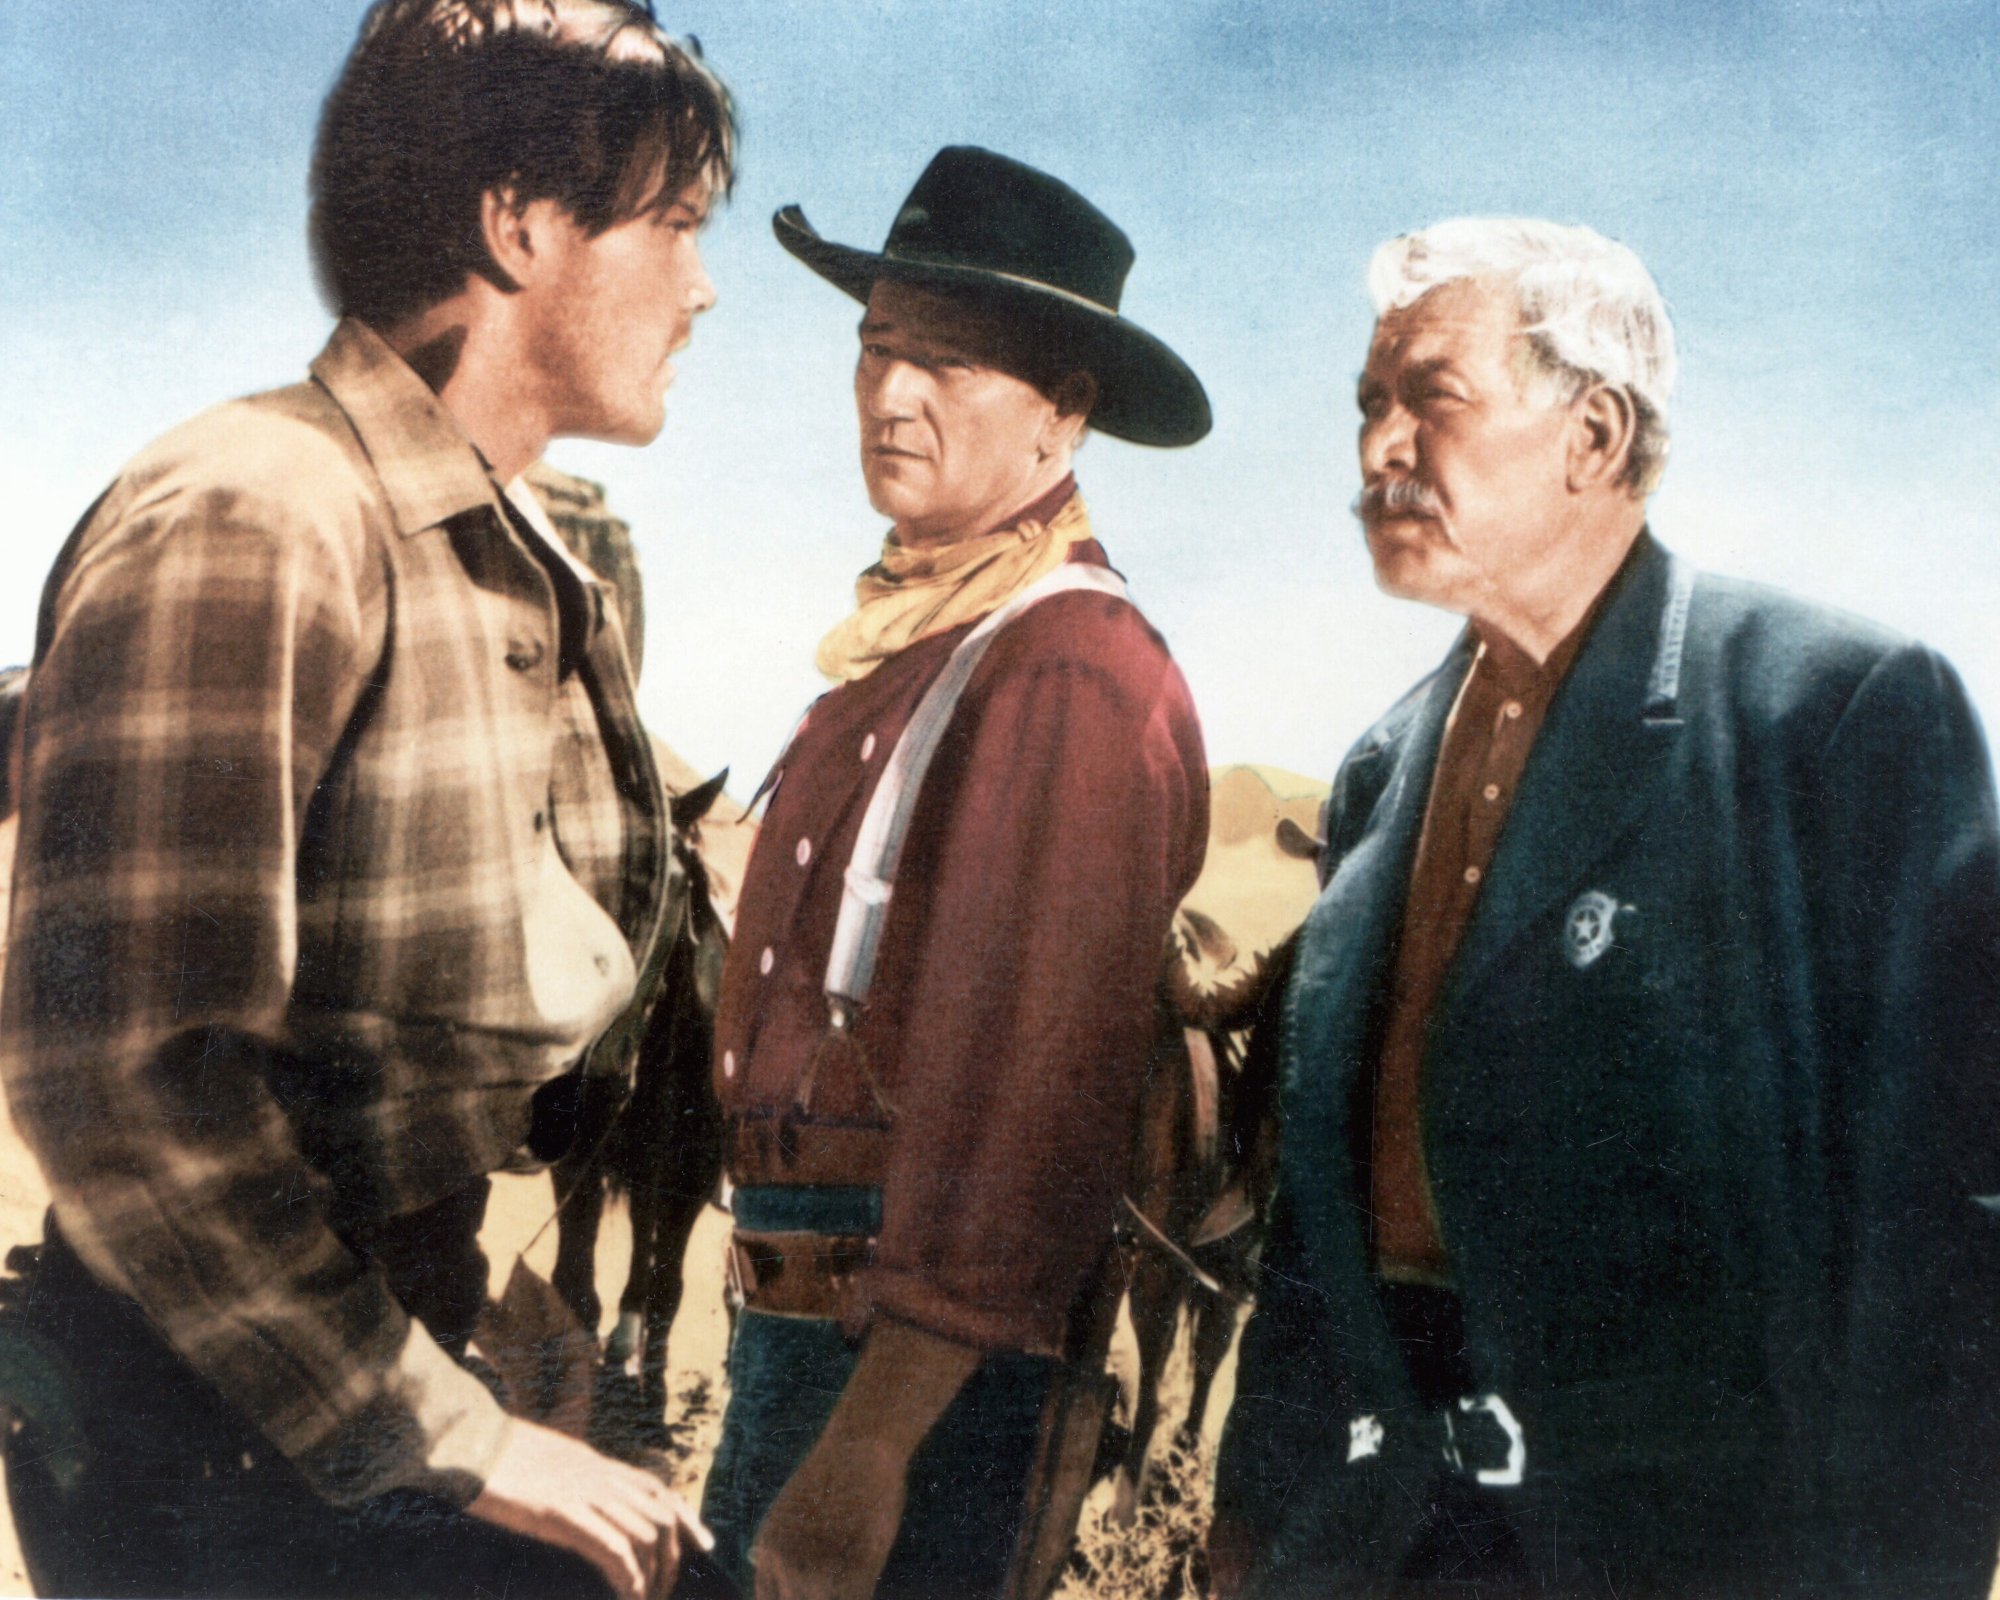 'The Searchers' Jeffrey Hunter as Martin Pawley, John Wayne as Ethan Edwards, and Ward Bond as Rev Capt. Samuel Johnston Clayton wearing Western clothes looking at each other with horses in the background